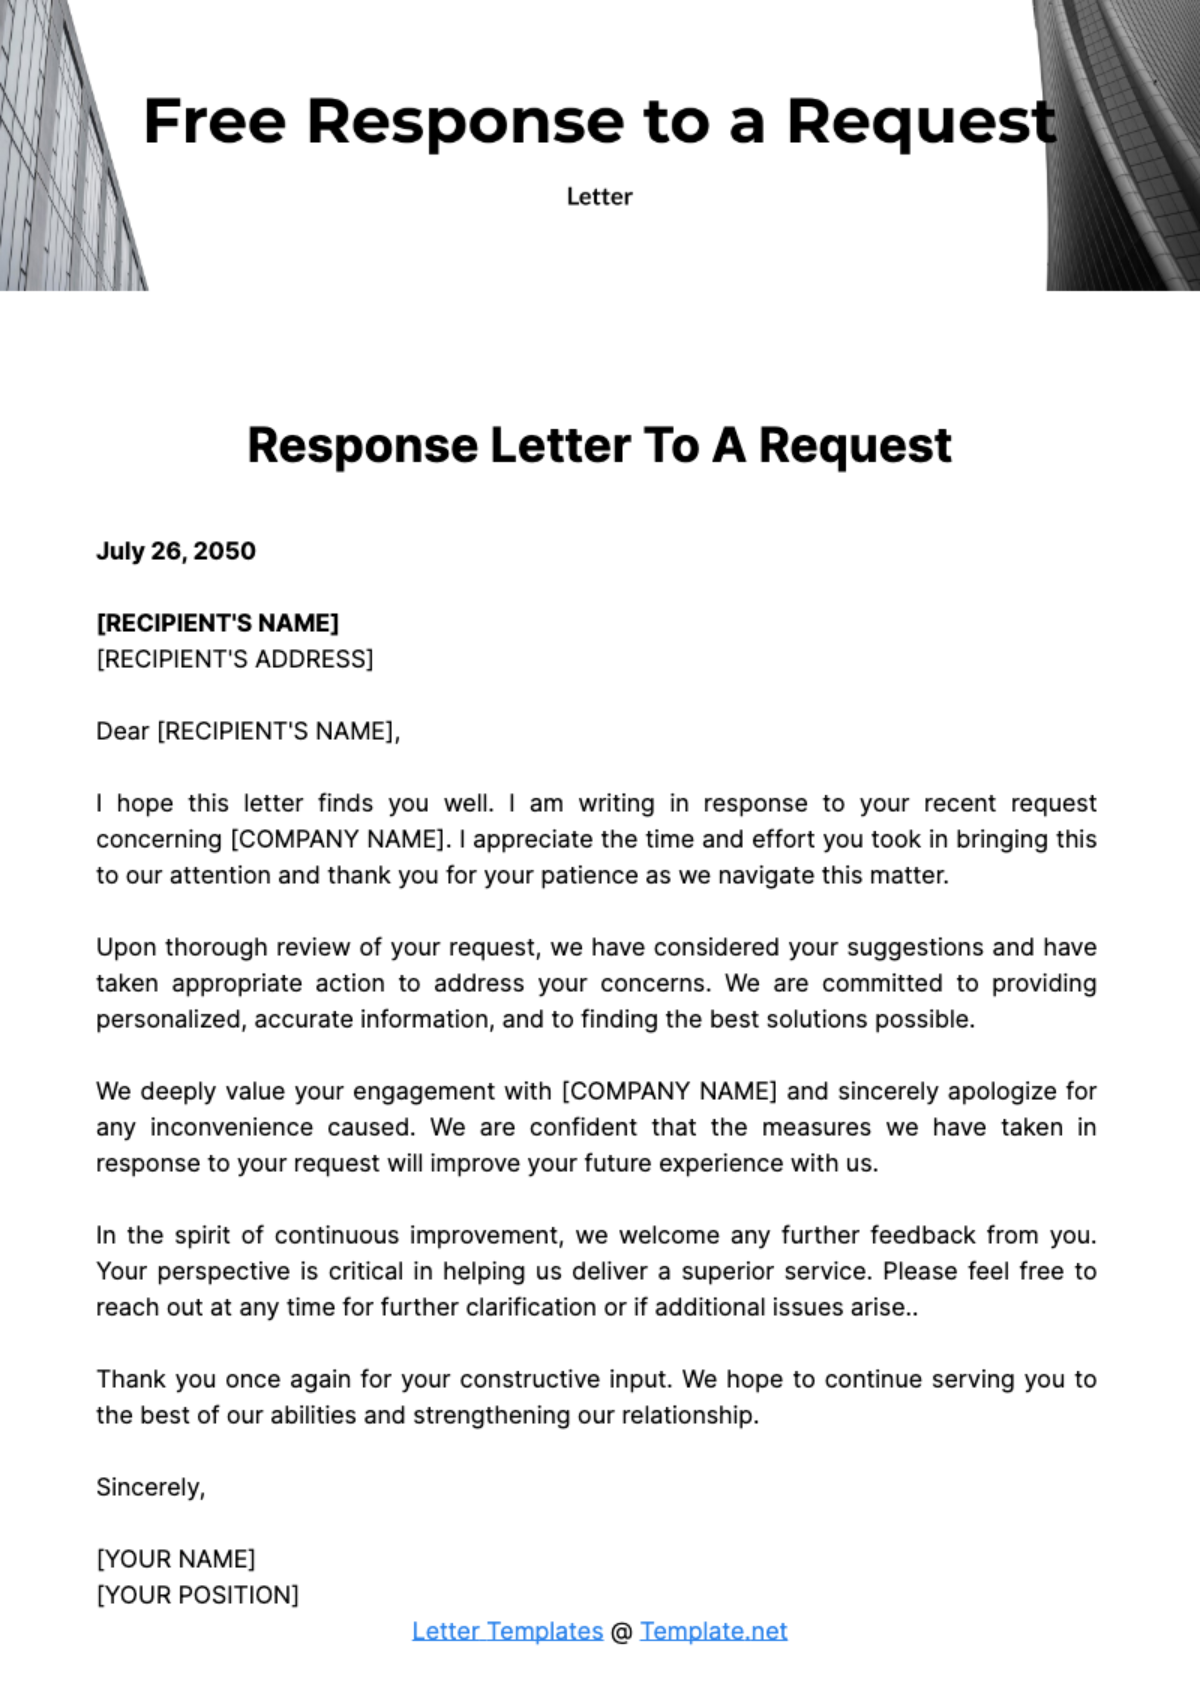 Free Response Letter to a Request Template